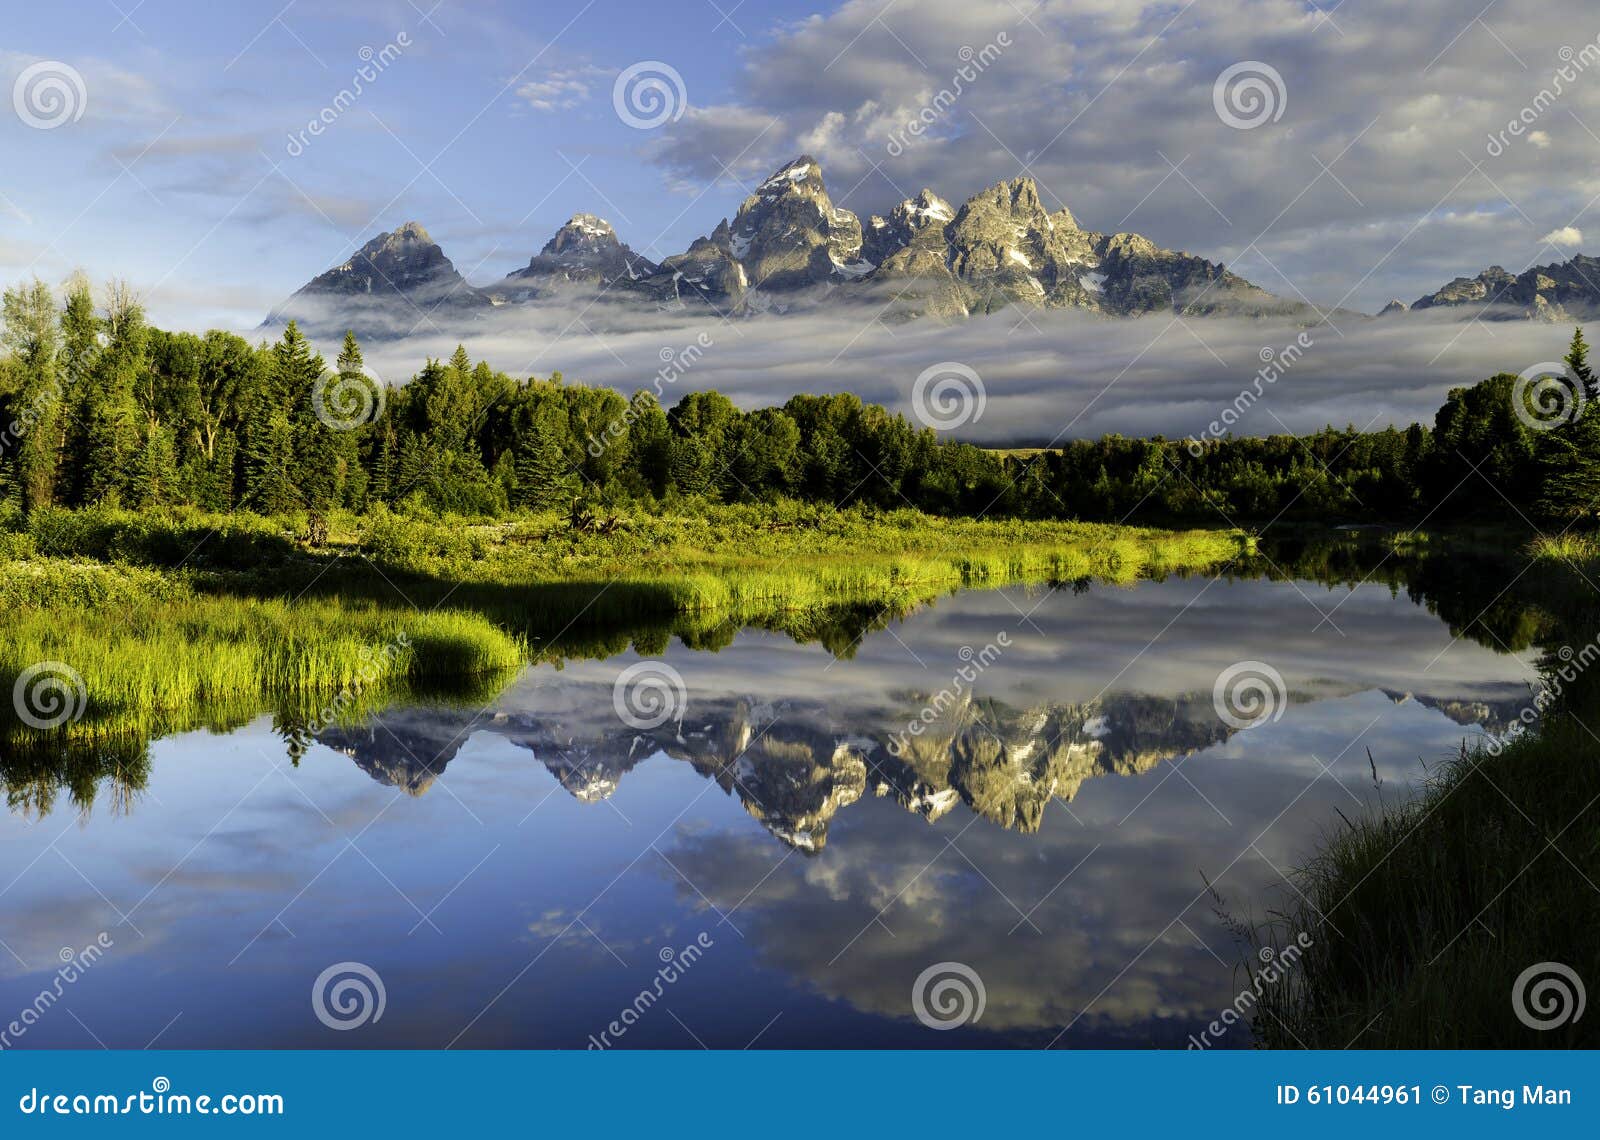 the grand tetons mountains in wyoming